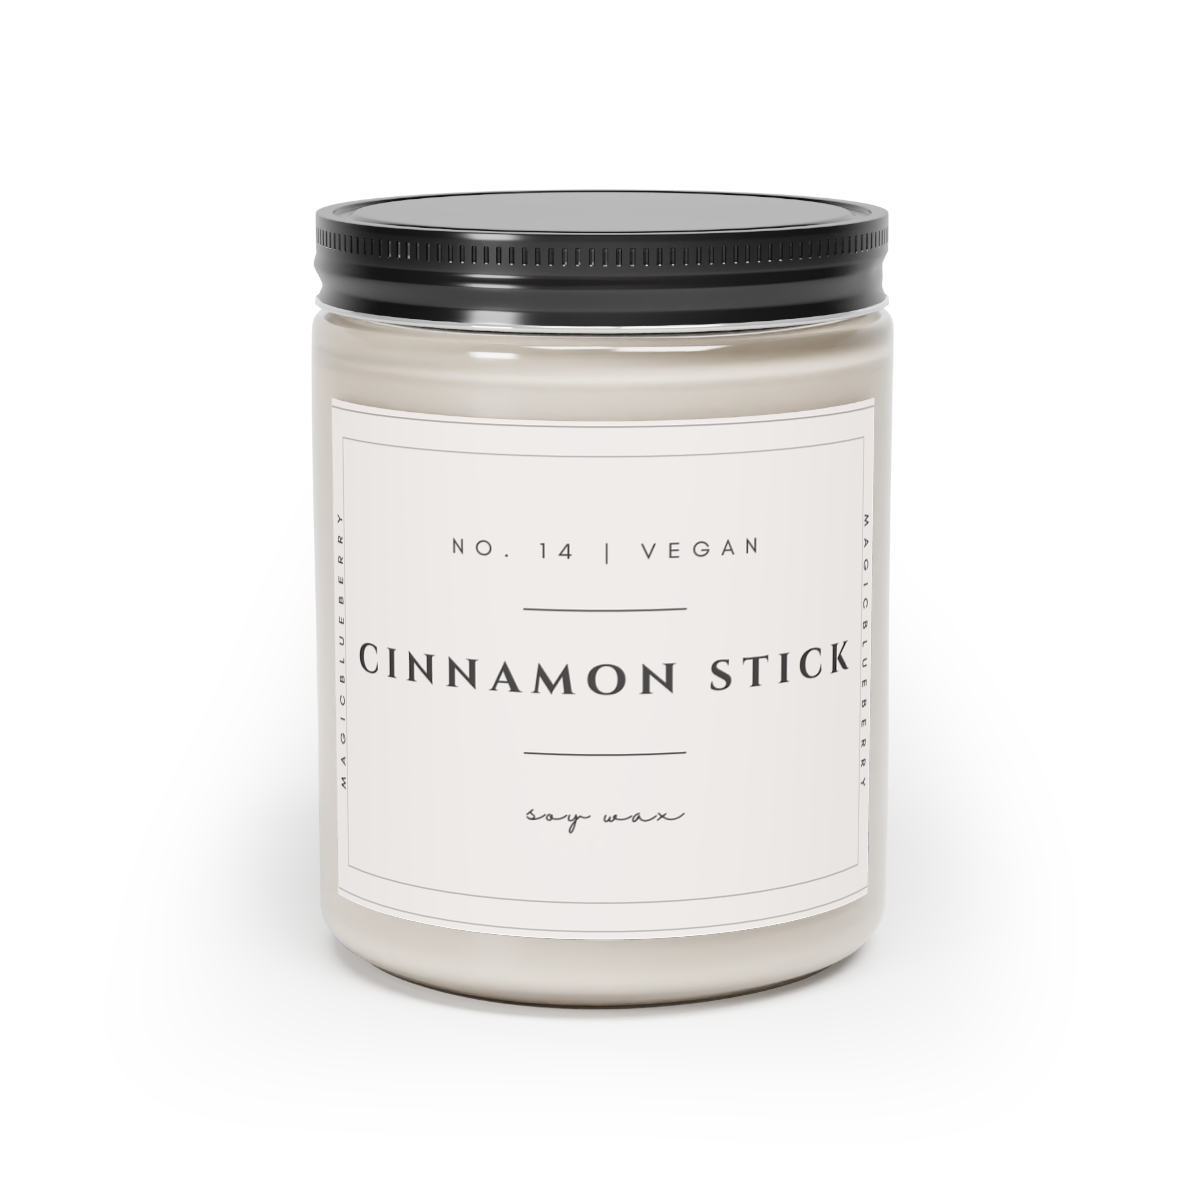 Cinnamon Stick - Scented Vegan Soy Wax Candles, Clear Jar Candle, Spell Candles, Sassy Candle, Vegan Candle, Cotton Wick Candle product thumbnail image